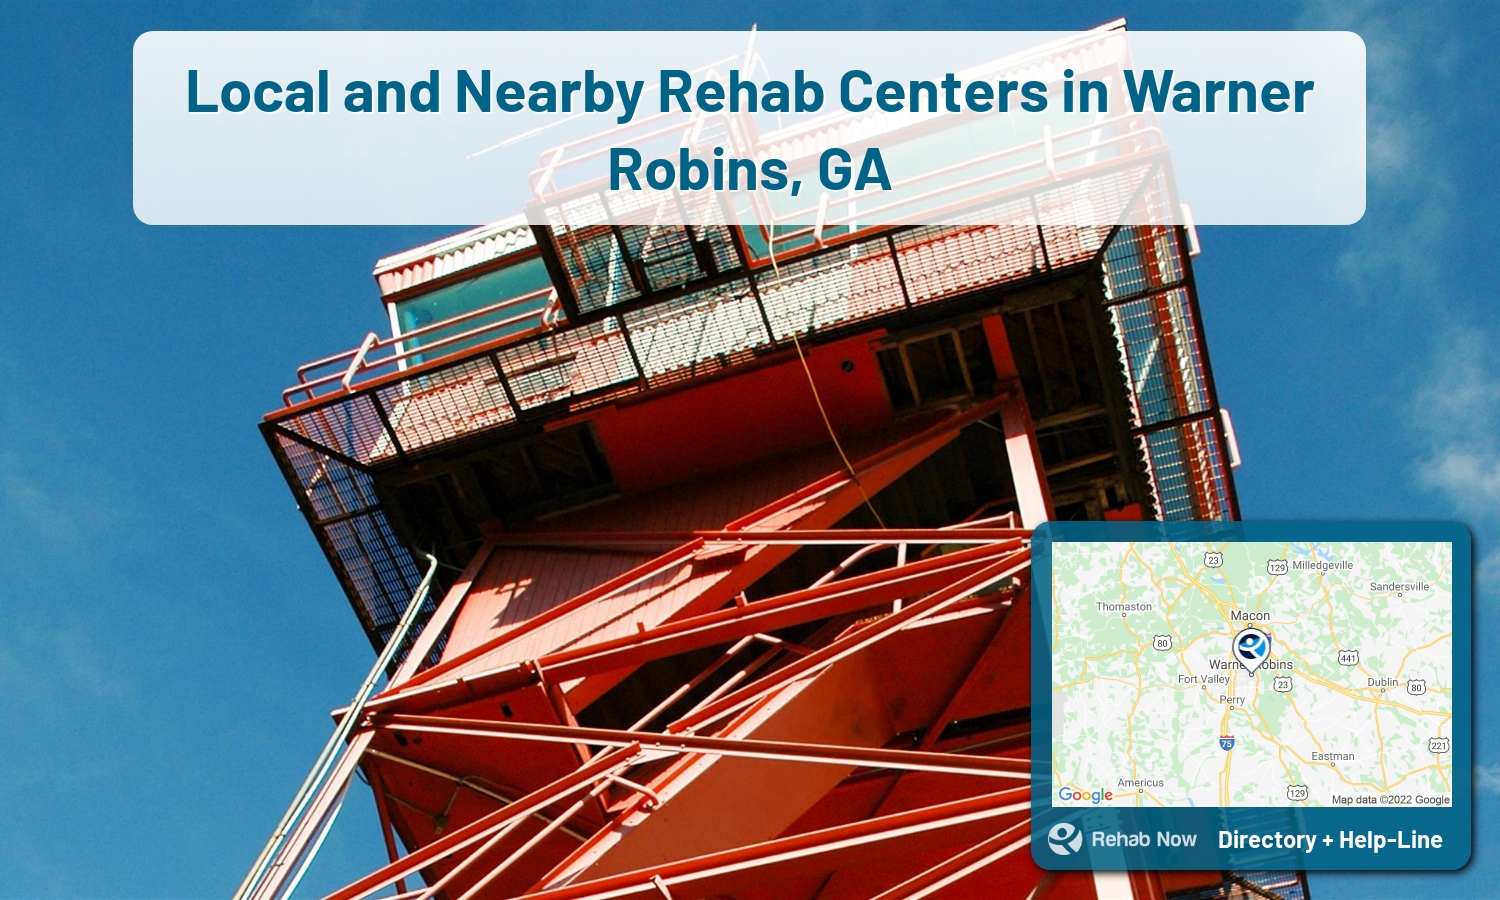 Drug rehab and alcohol treatment services nearby Warner Robins, GA. Need help choosing a treatment program? Call our free hotline!